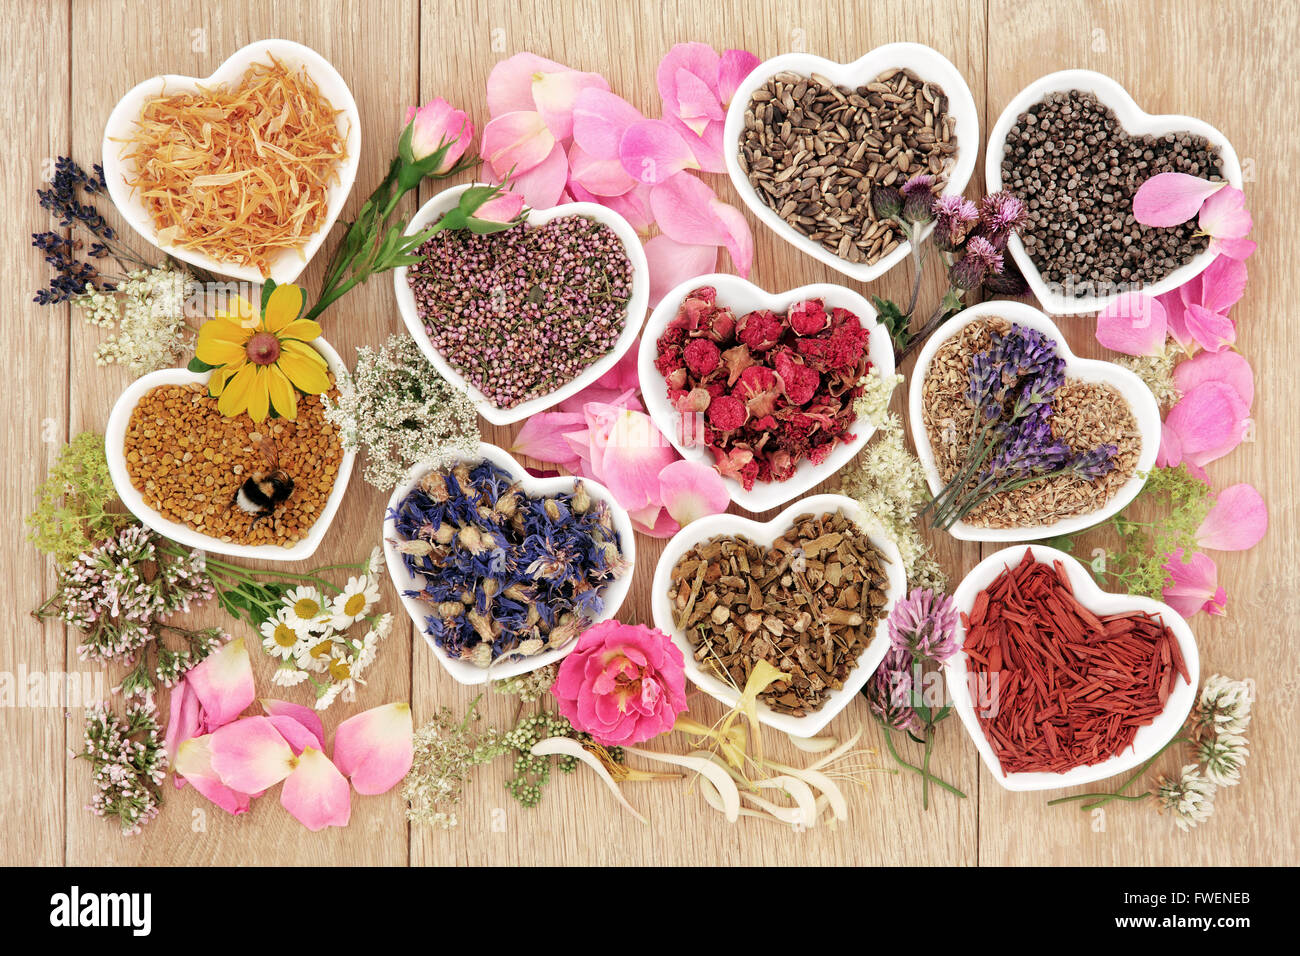 Healing herb and flower selection used in herbal medicine in heart shaped bowls with pollen grain and honey bee. Stock Photo